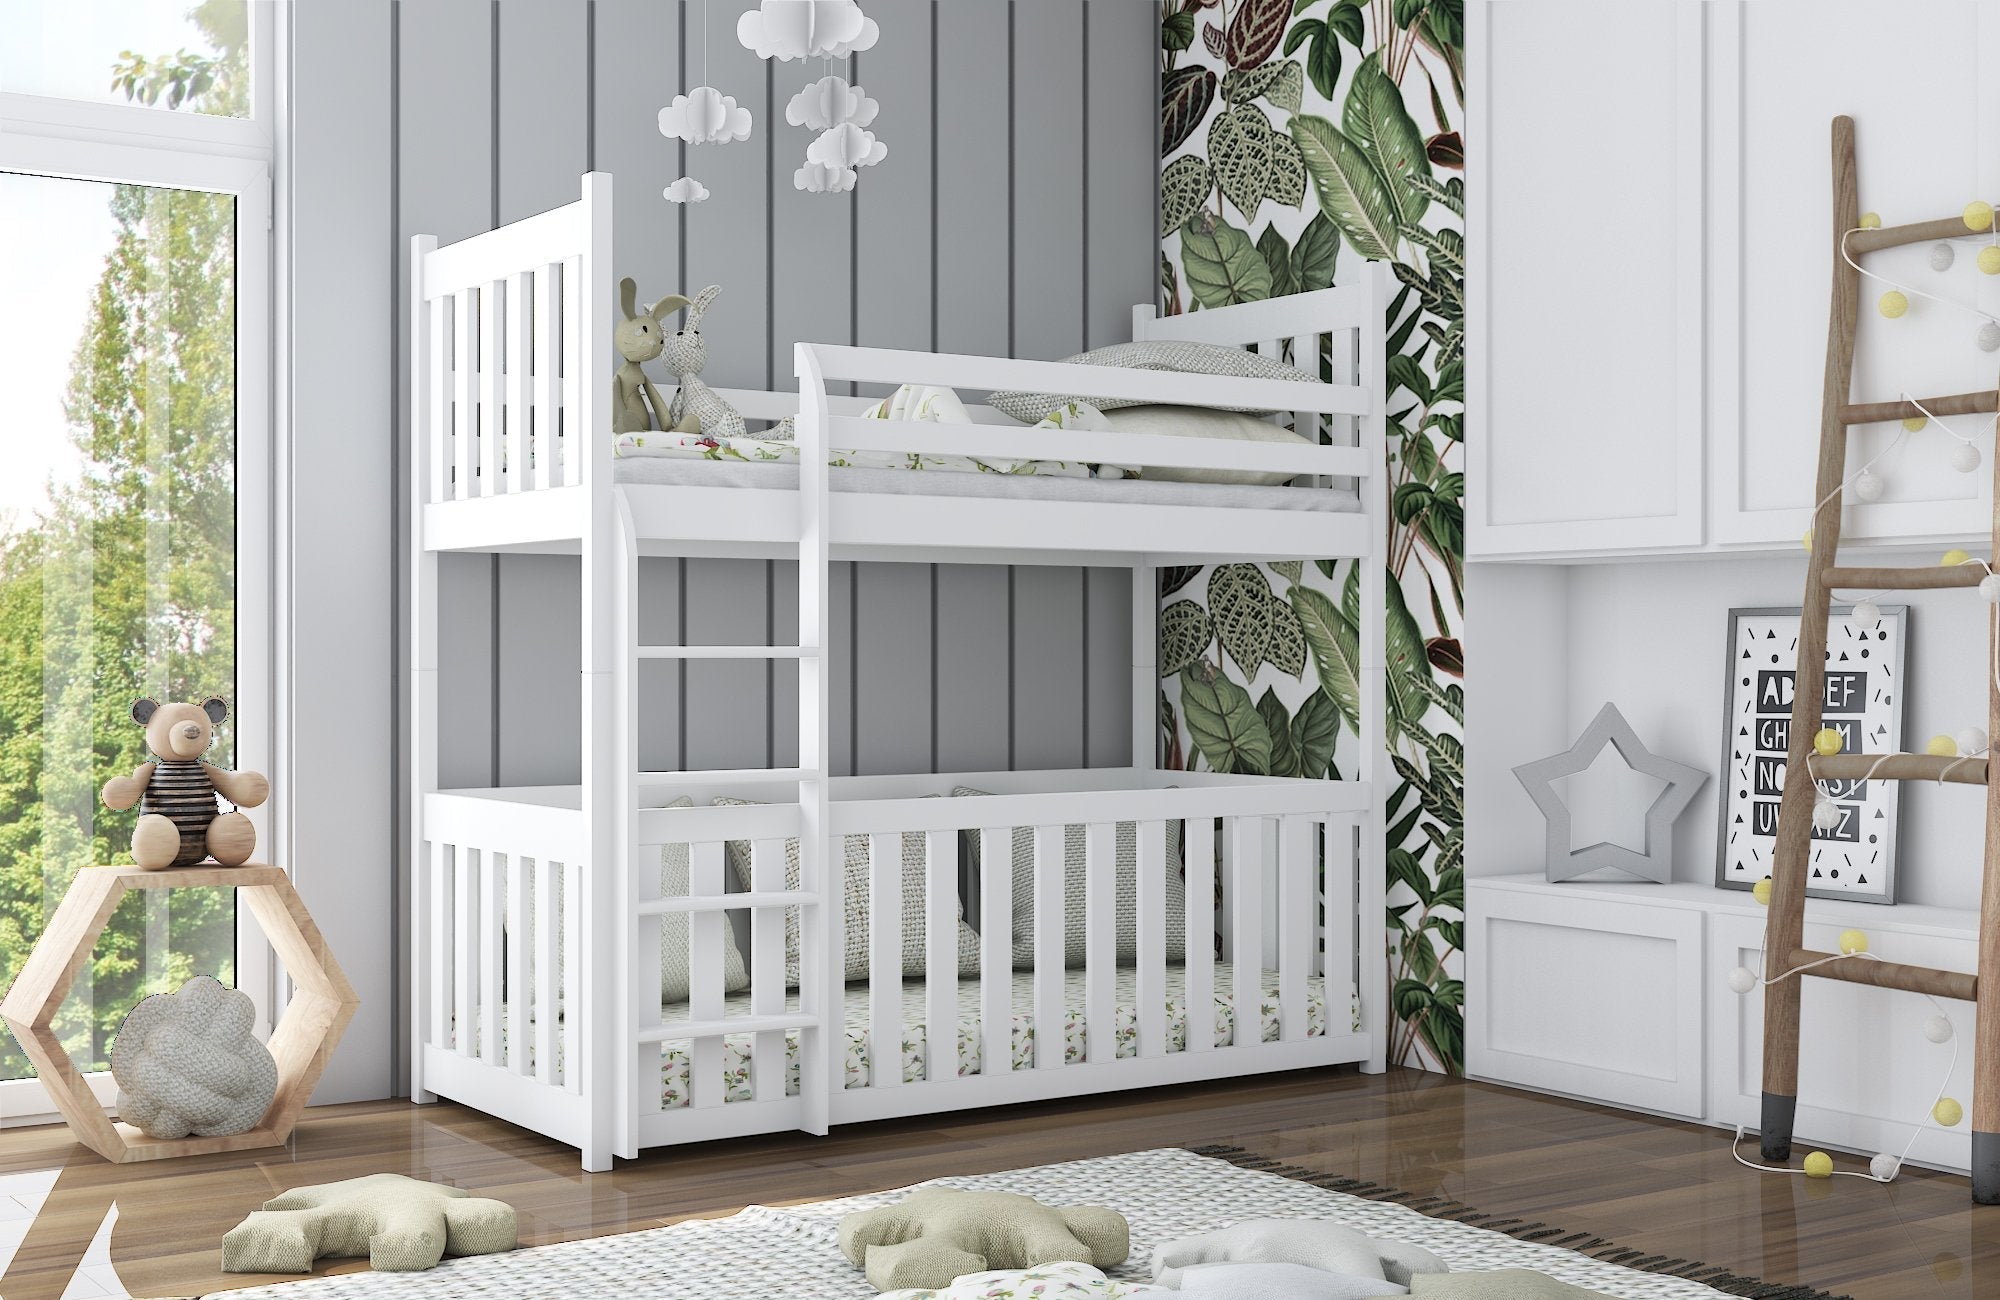 View Wooden Bunk Bed Cris with Cot Bed White Matt Without Mattresses information